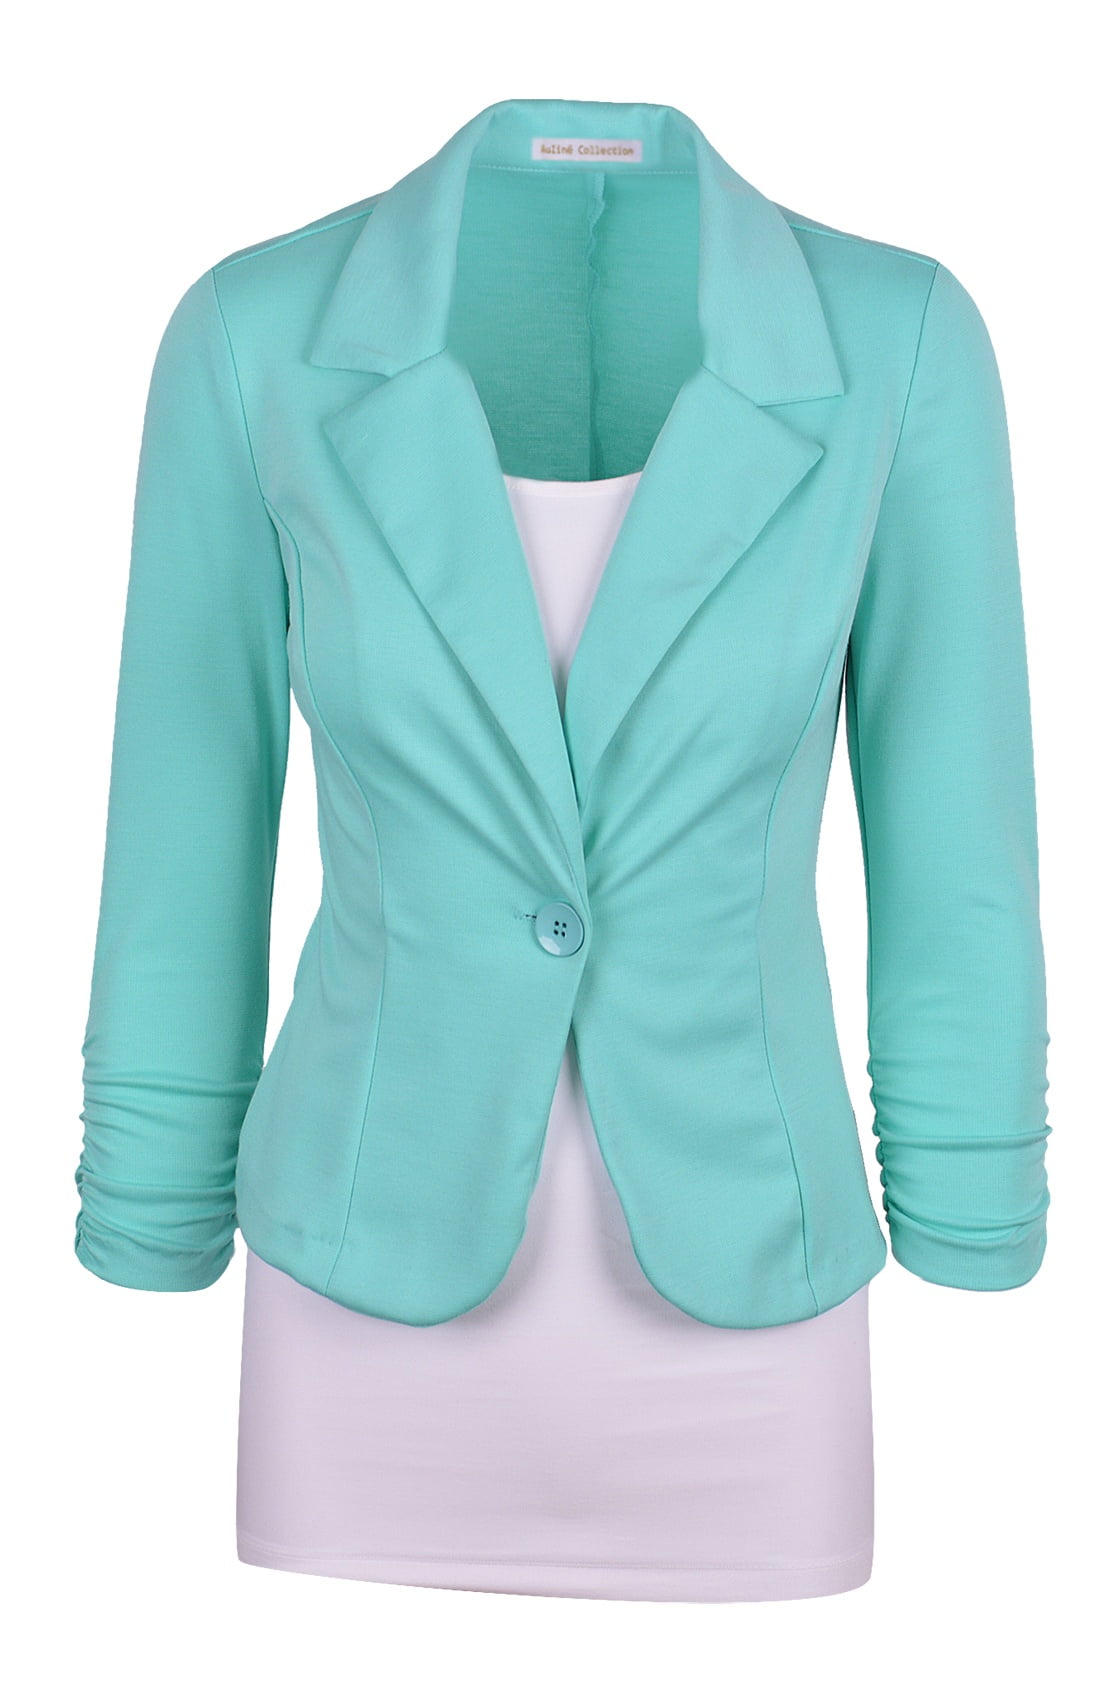 Auliné Collection Women's Casual Work Solid Color Knit Blazer 